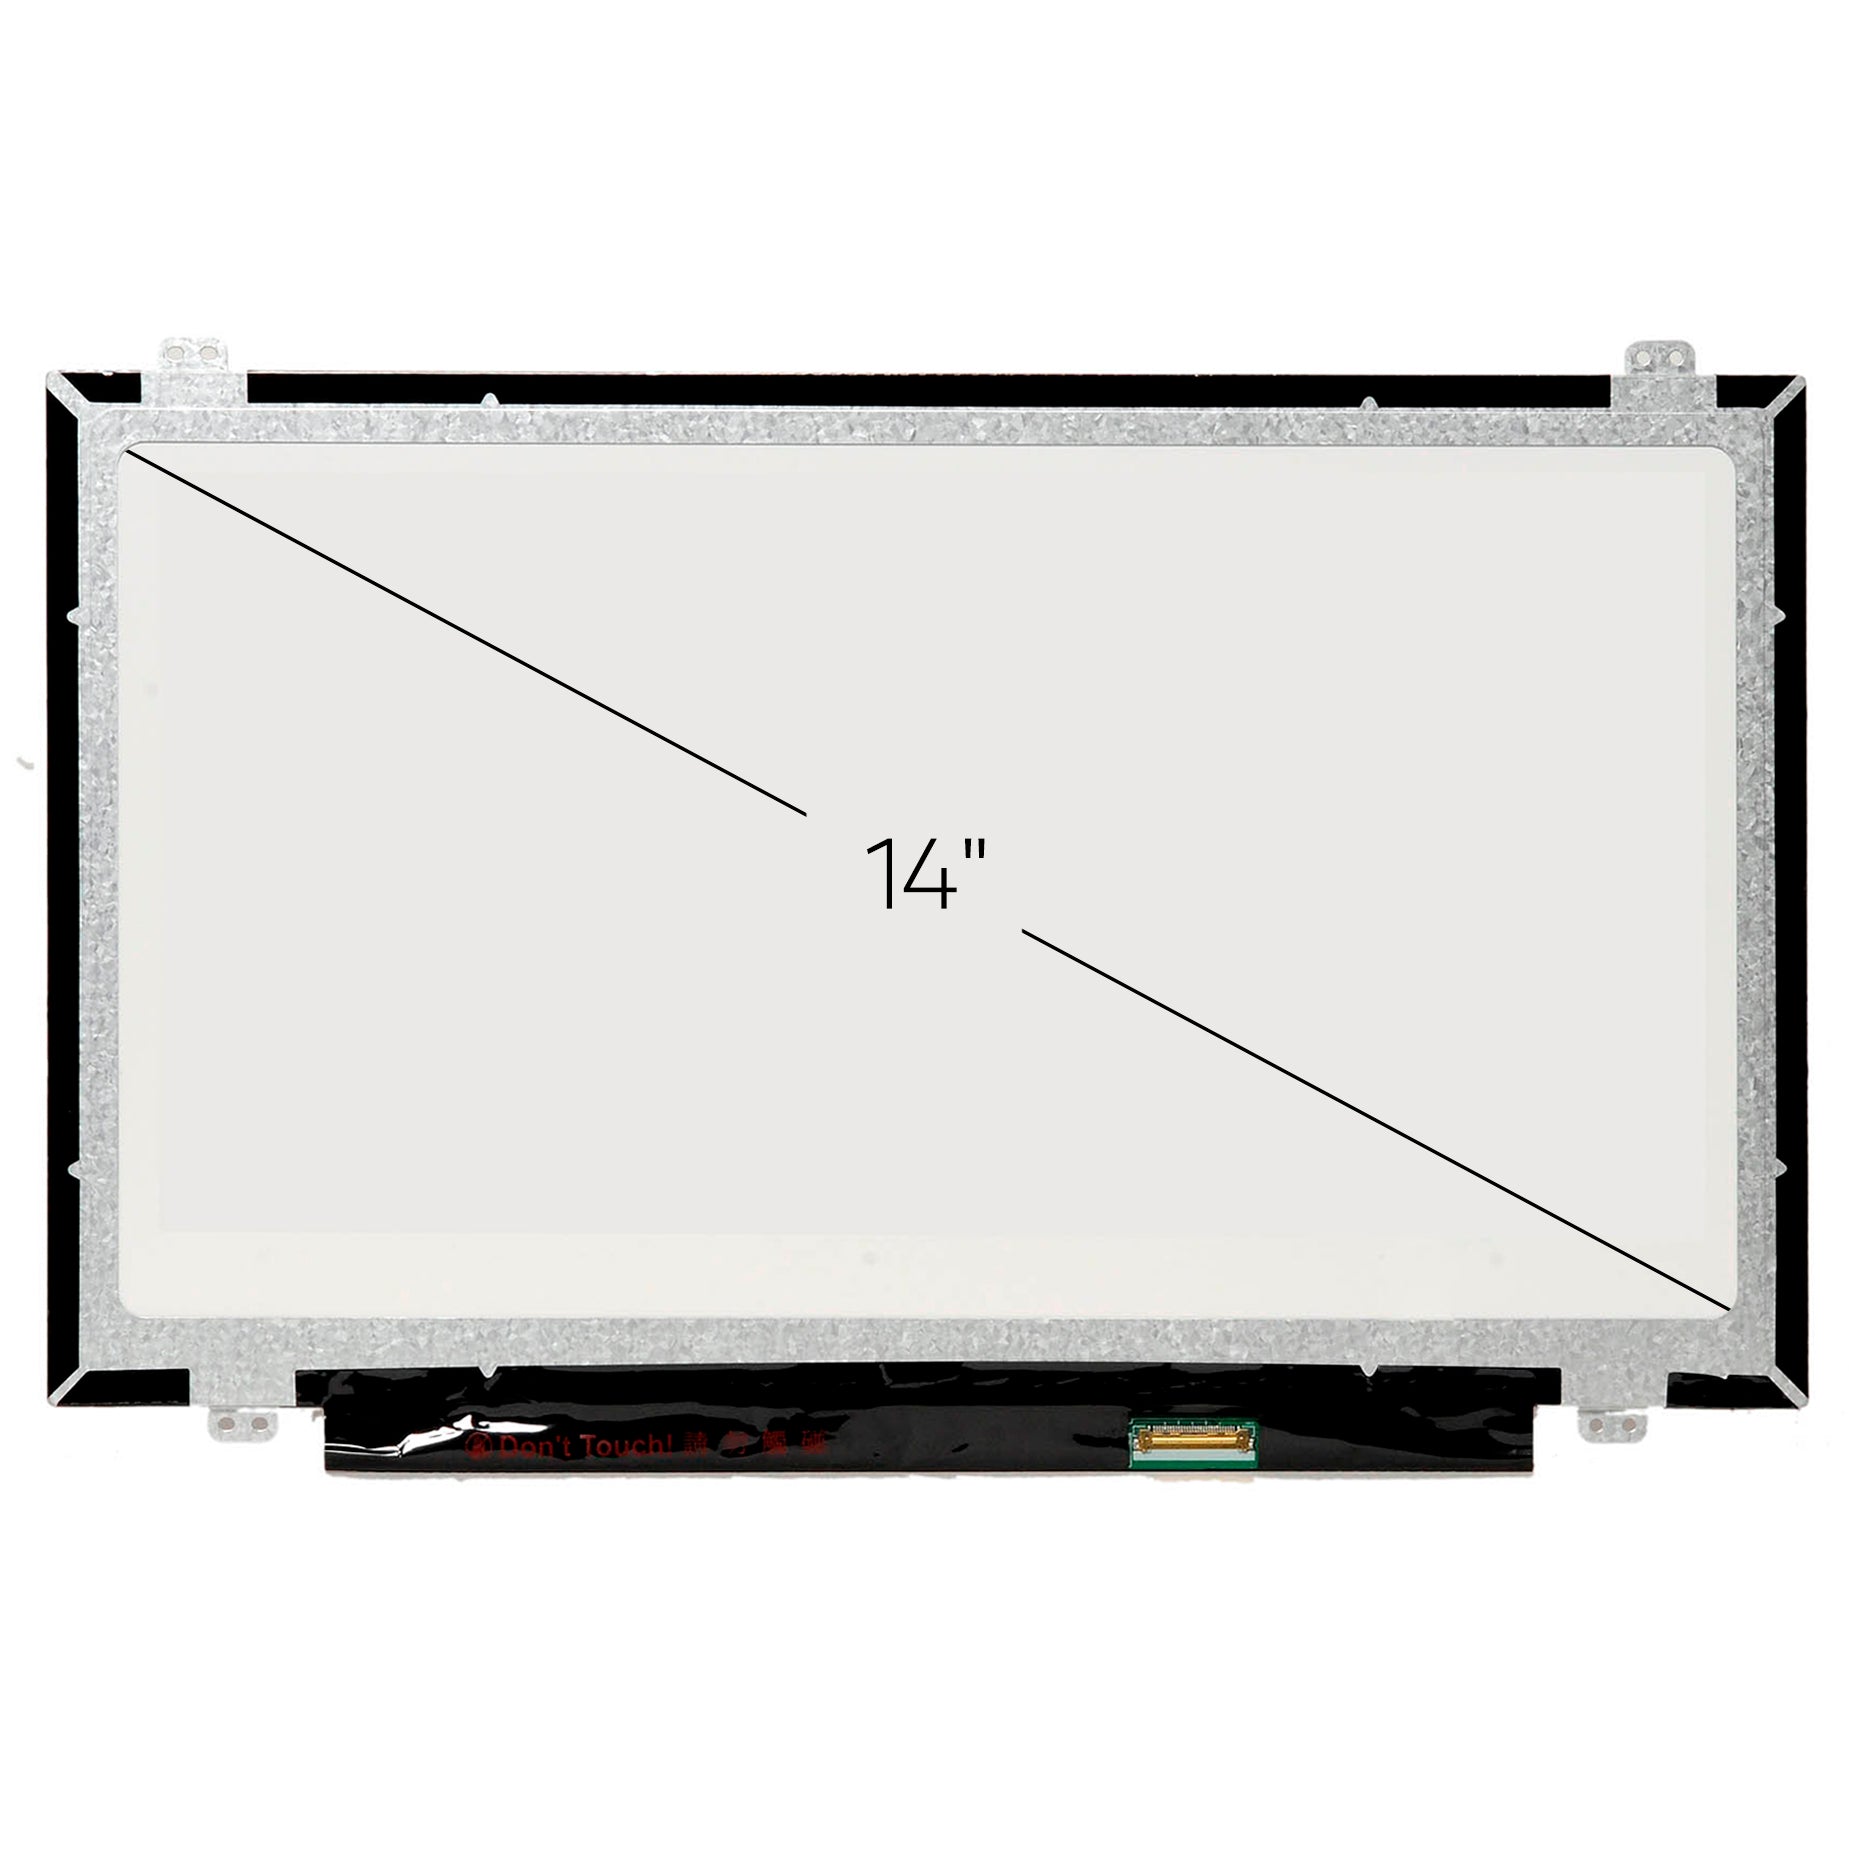 Screen Replacement for HP Probook 440 G5 HD 1366x768 Glossy LCD LED Display